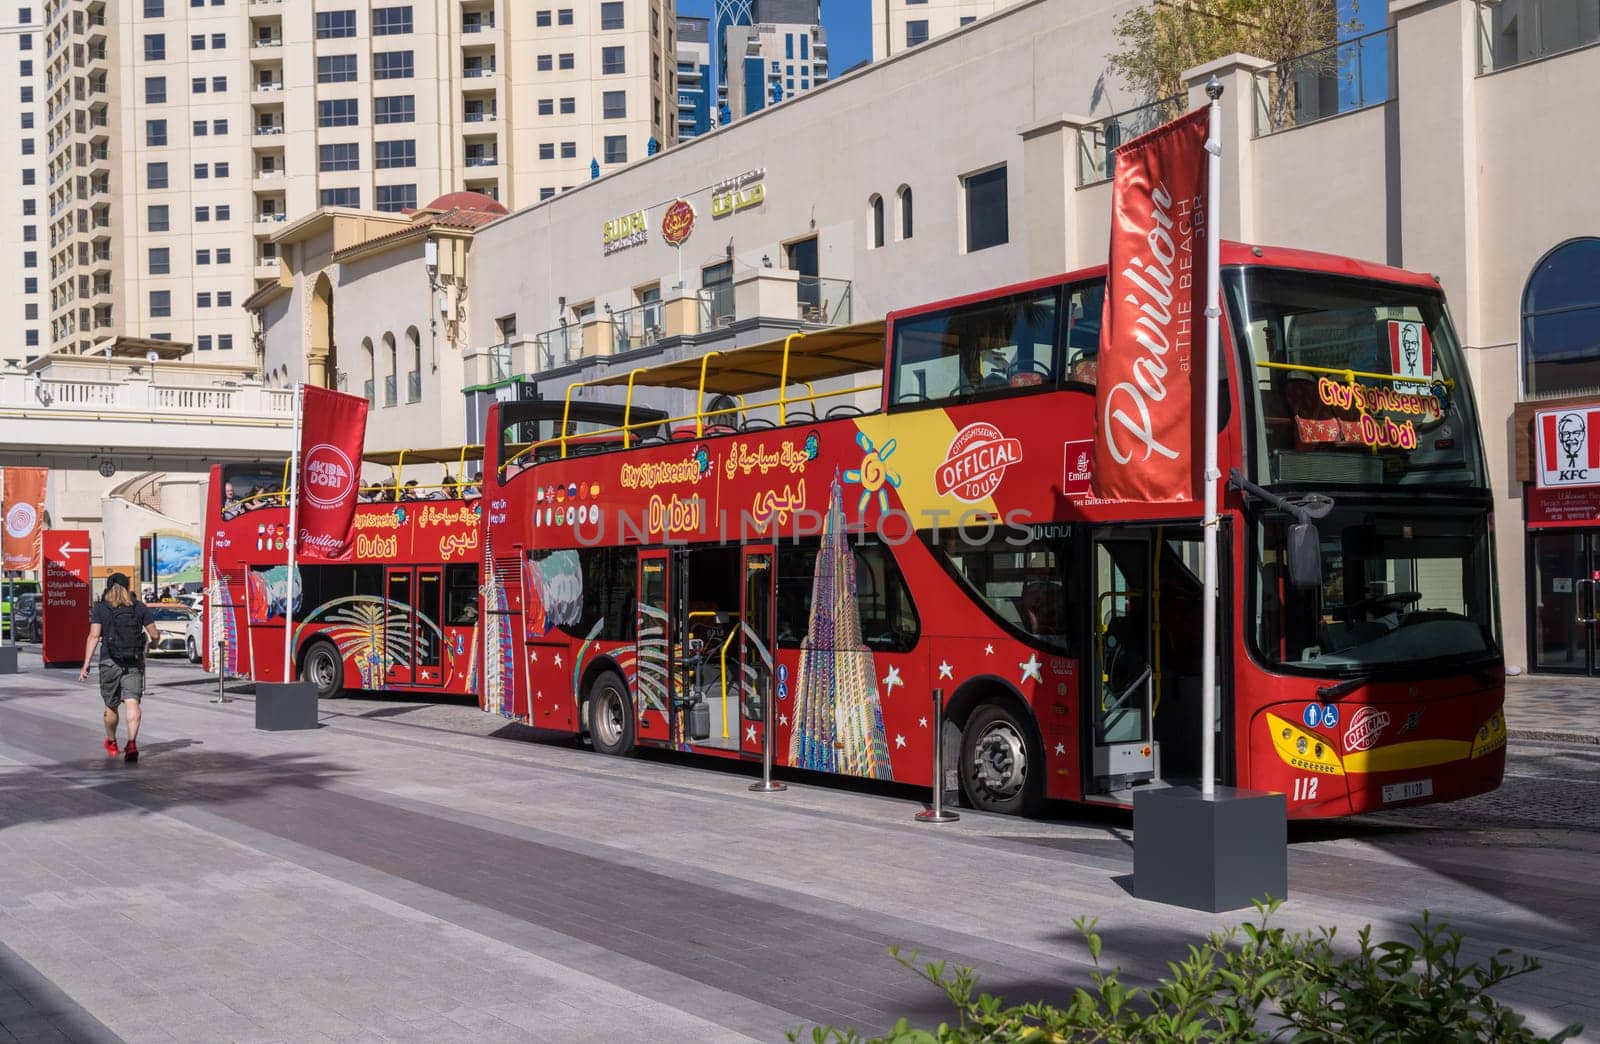 City Sightseeing tour on red double decker bus in JBR Beach by steheap